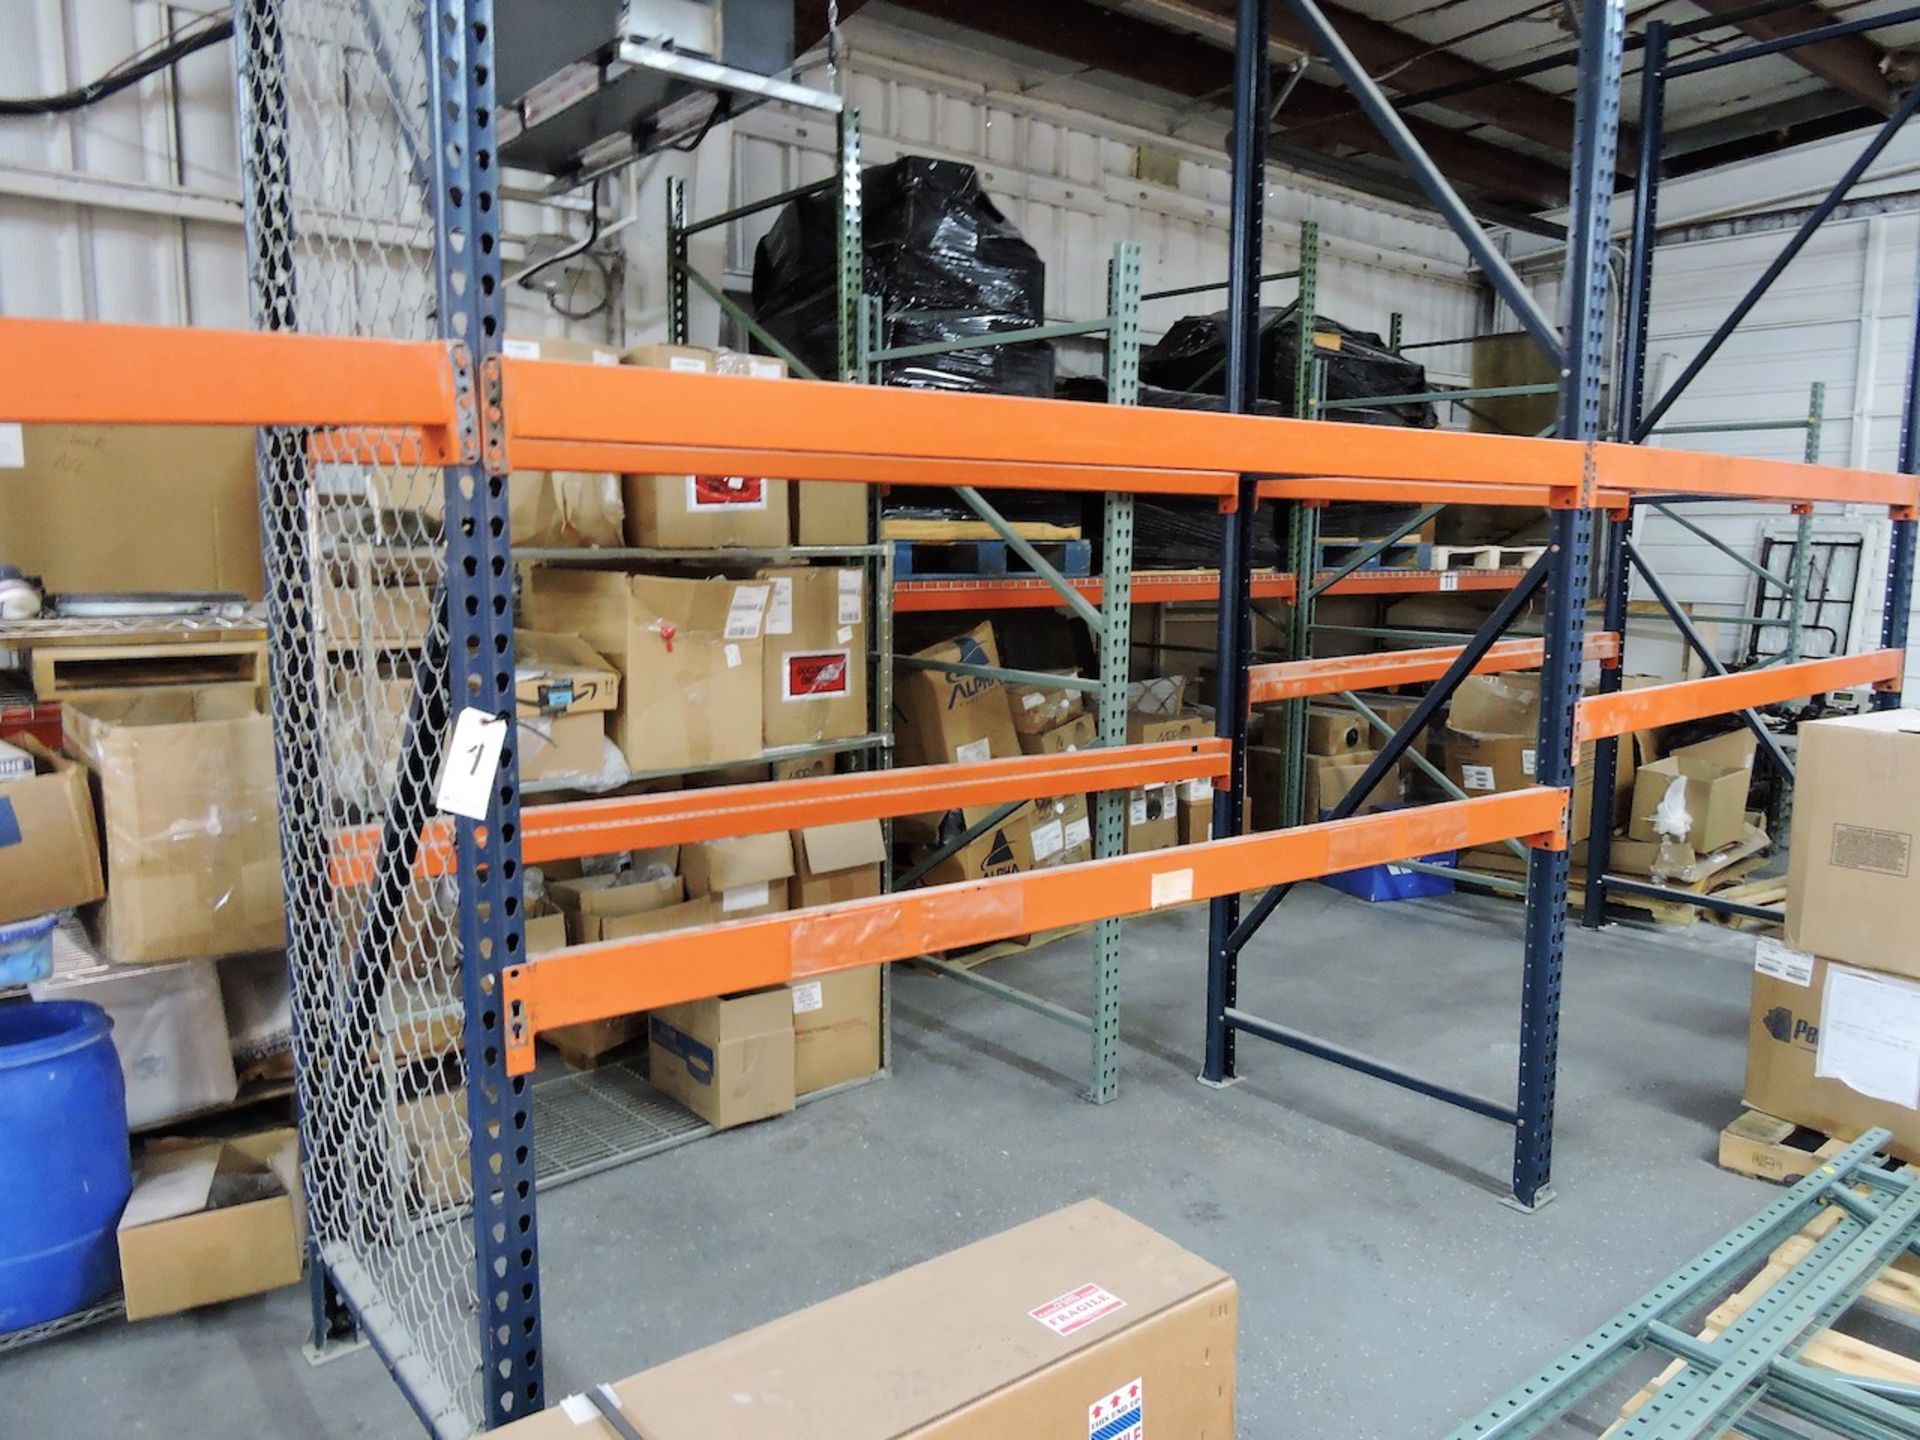 PALLET RACKING 4 UPRIGHTS 10 BEAMS 42” WIDE X 96” LONG X 12 FT HIGH 5000 LB LOAD CAPACITY